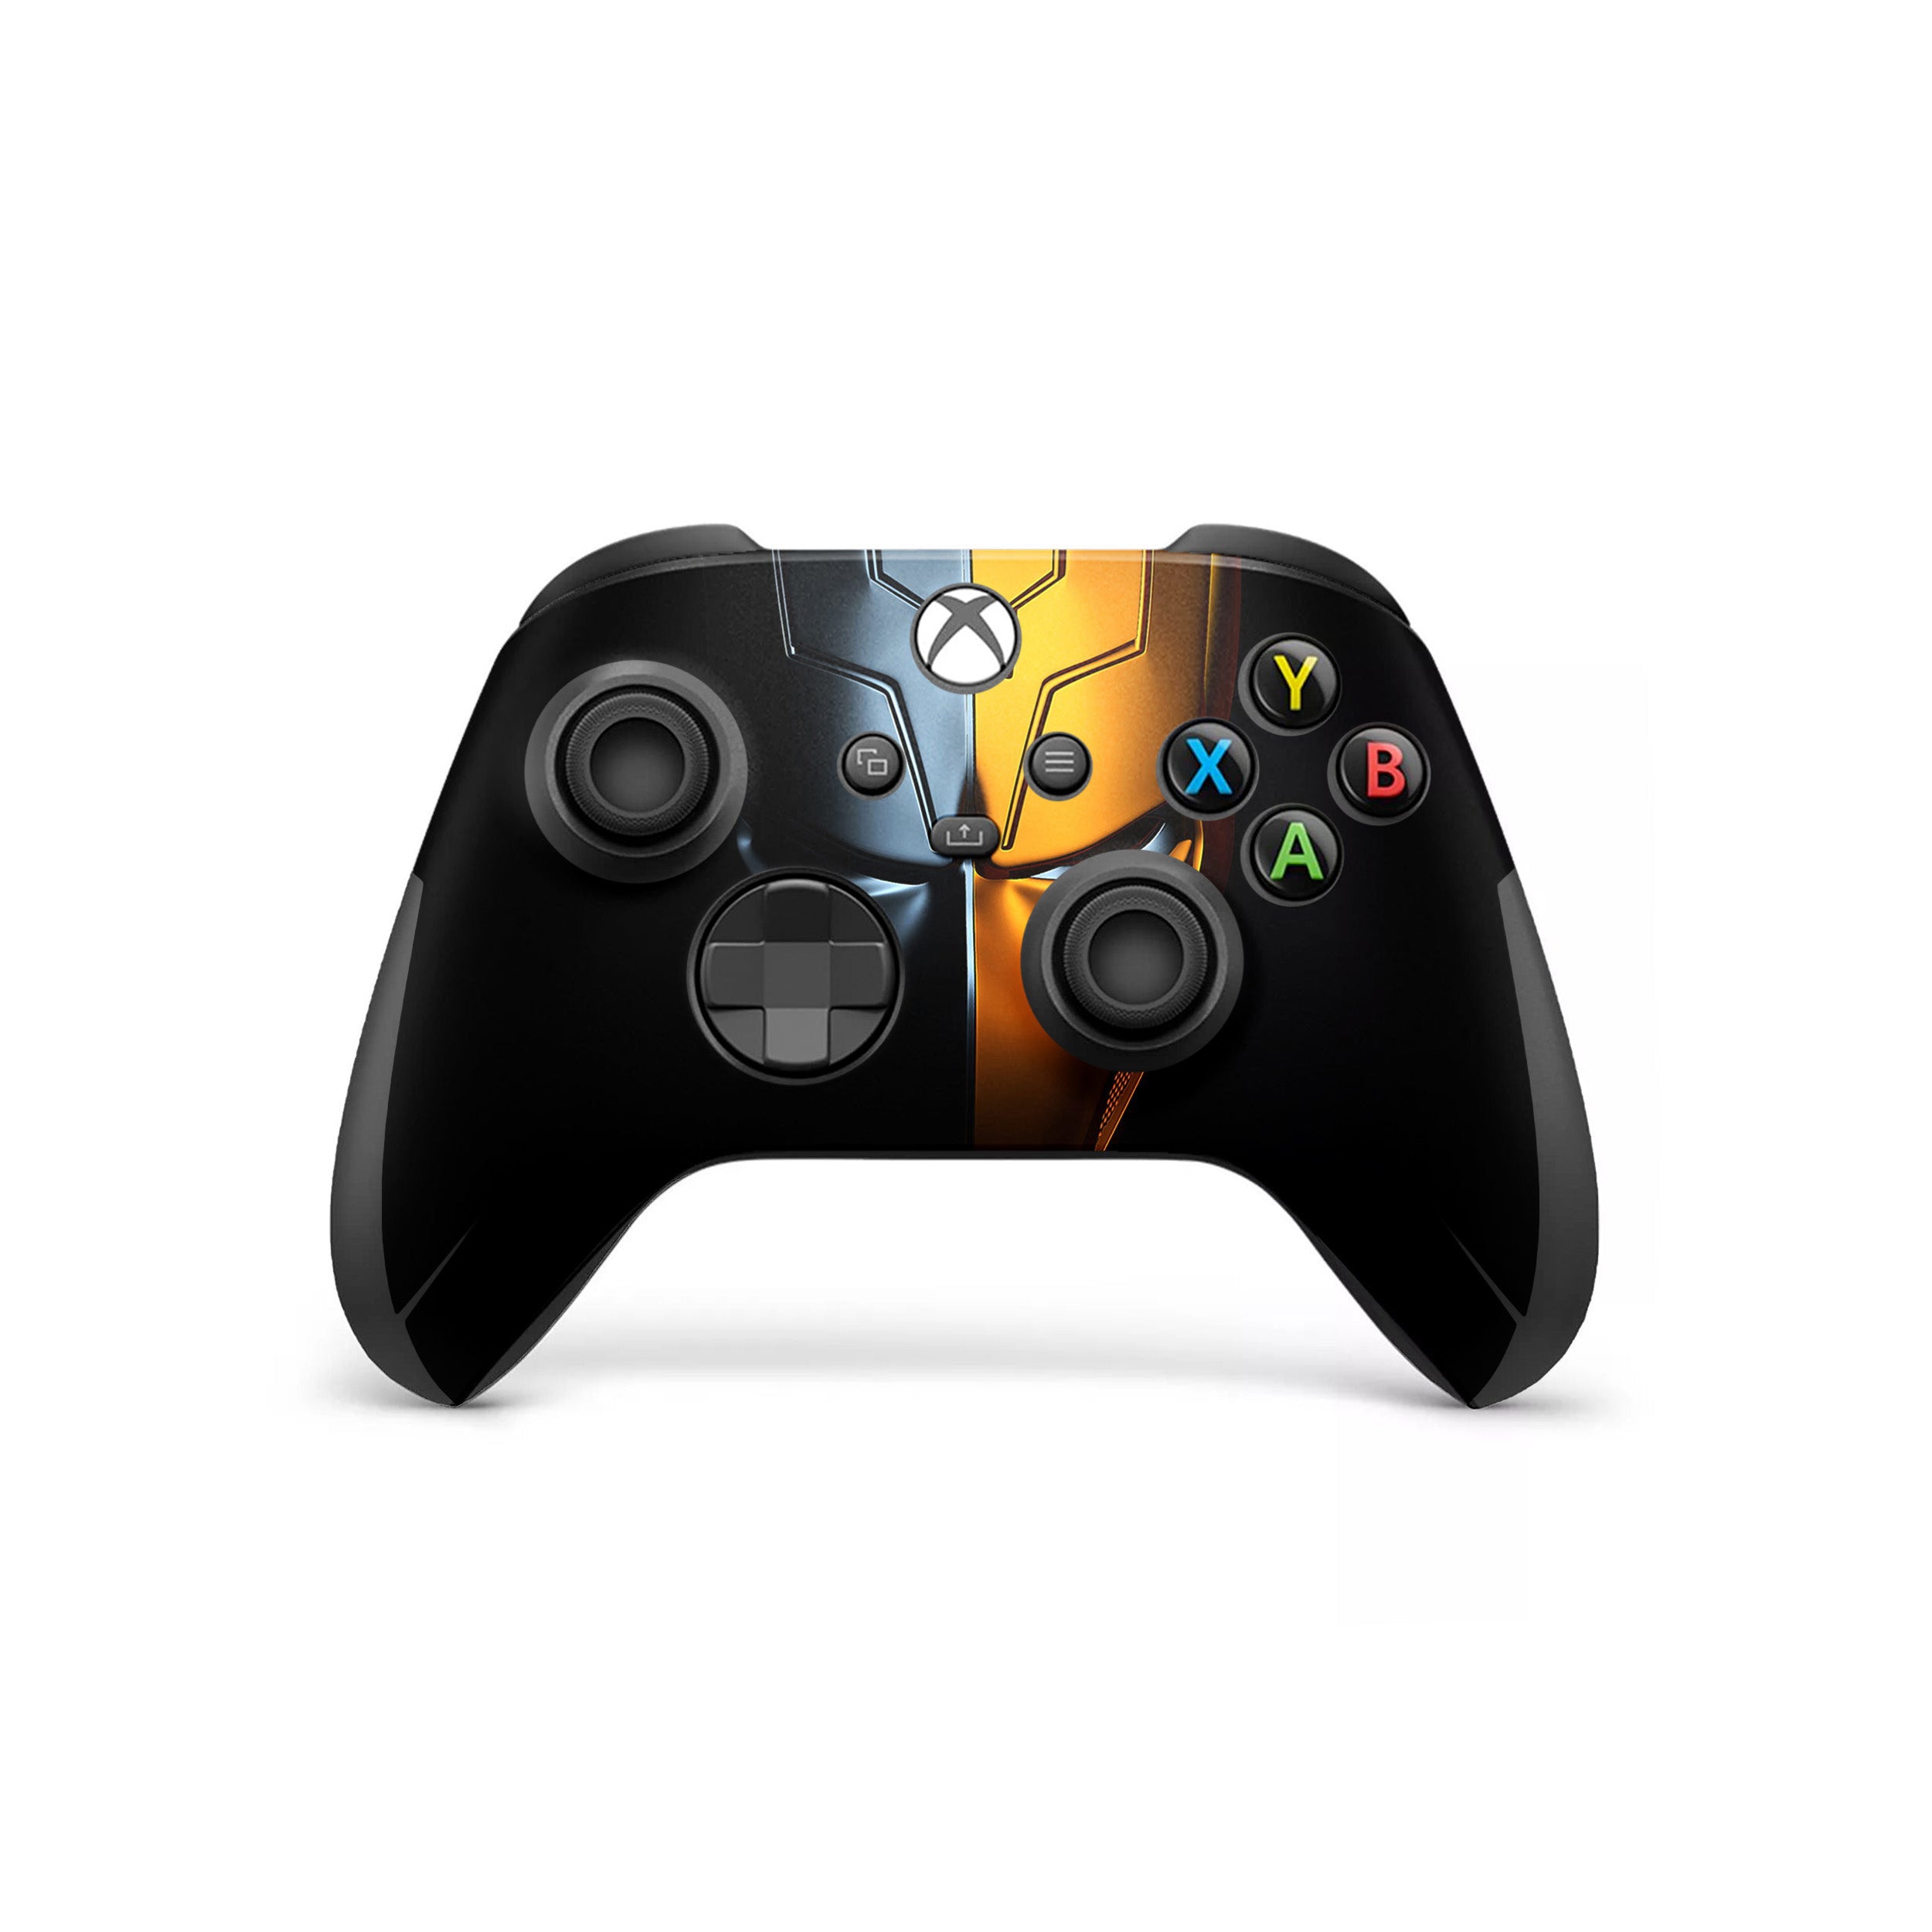 A video game skin featuring a DC Comics Deathstroke design for the Xbox Wireless Controller.